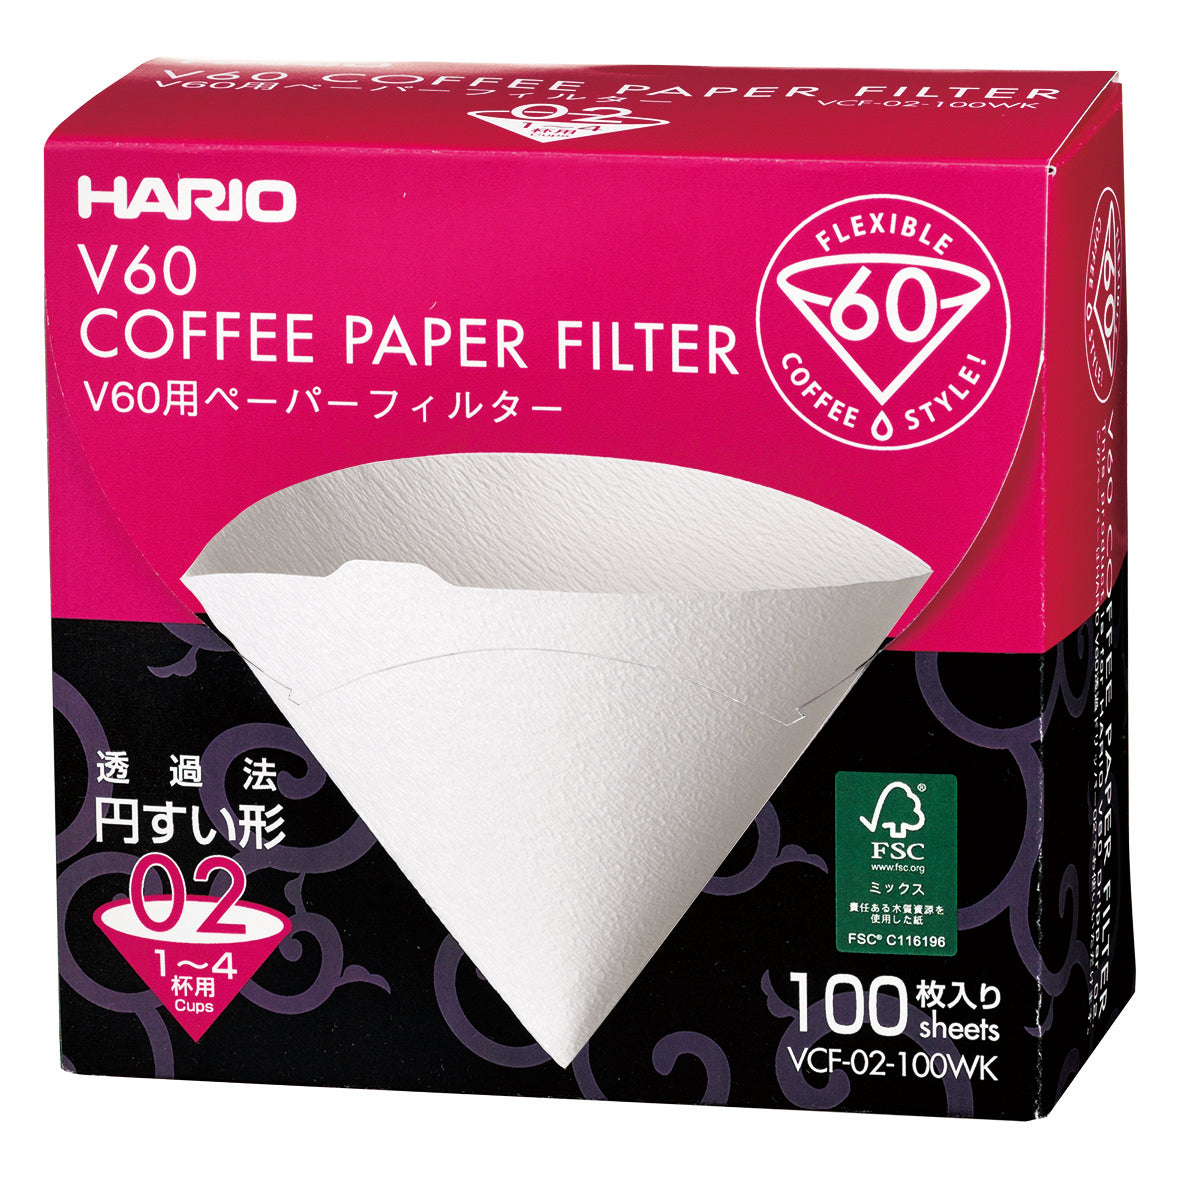 Hario White Paper Filters for V60 02 (100 sheets)